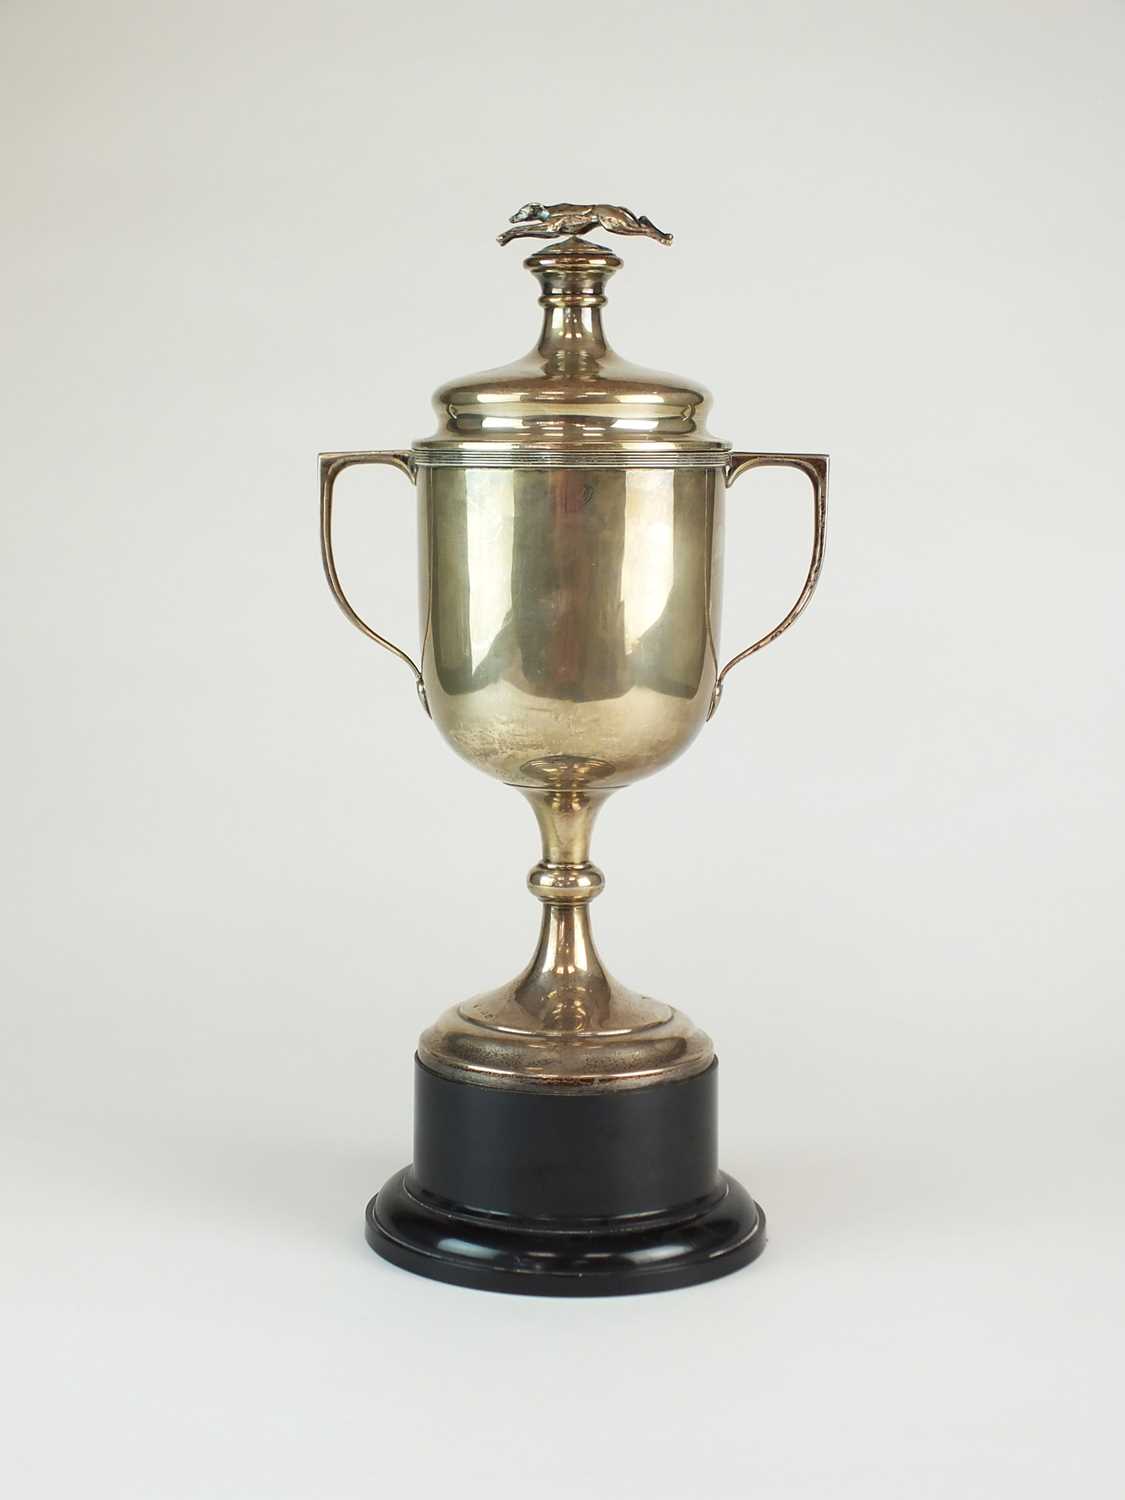 Lot 23 - A large silver trophy cup